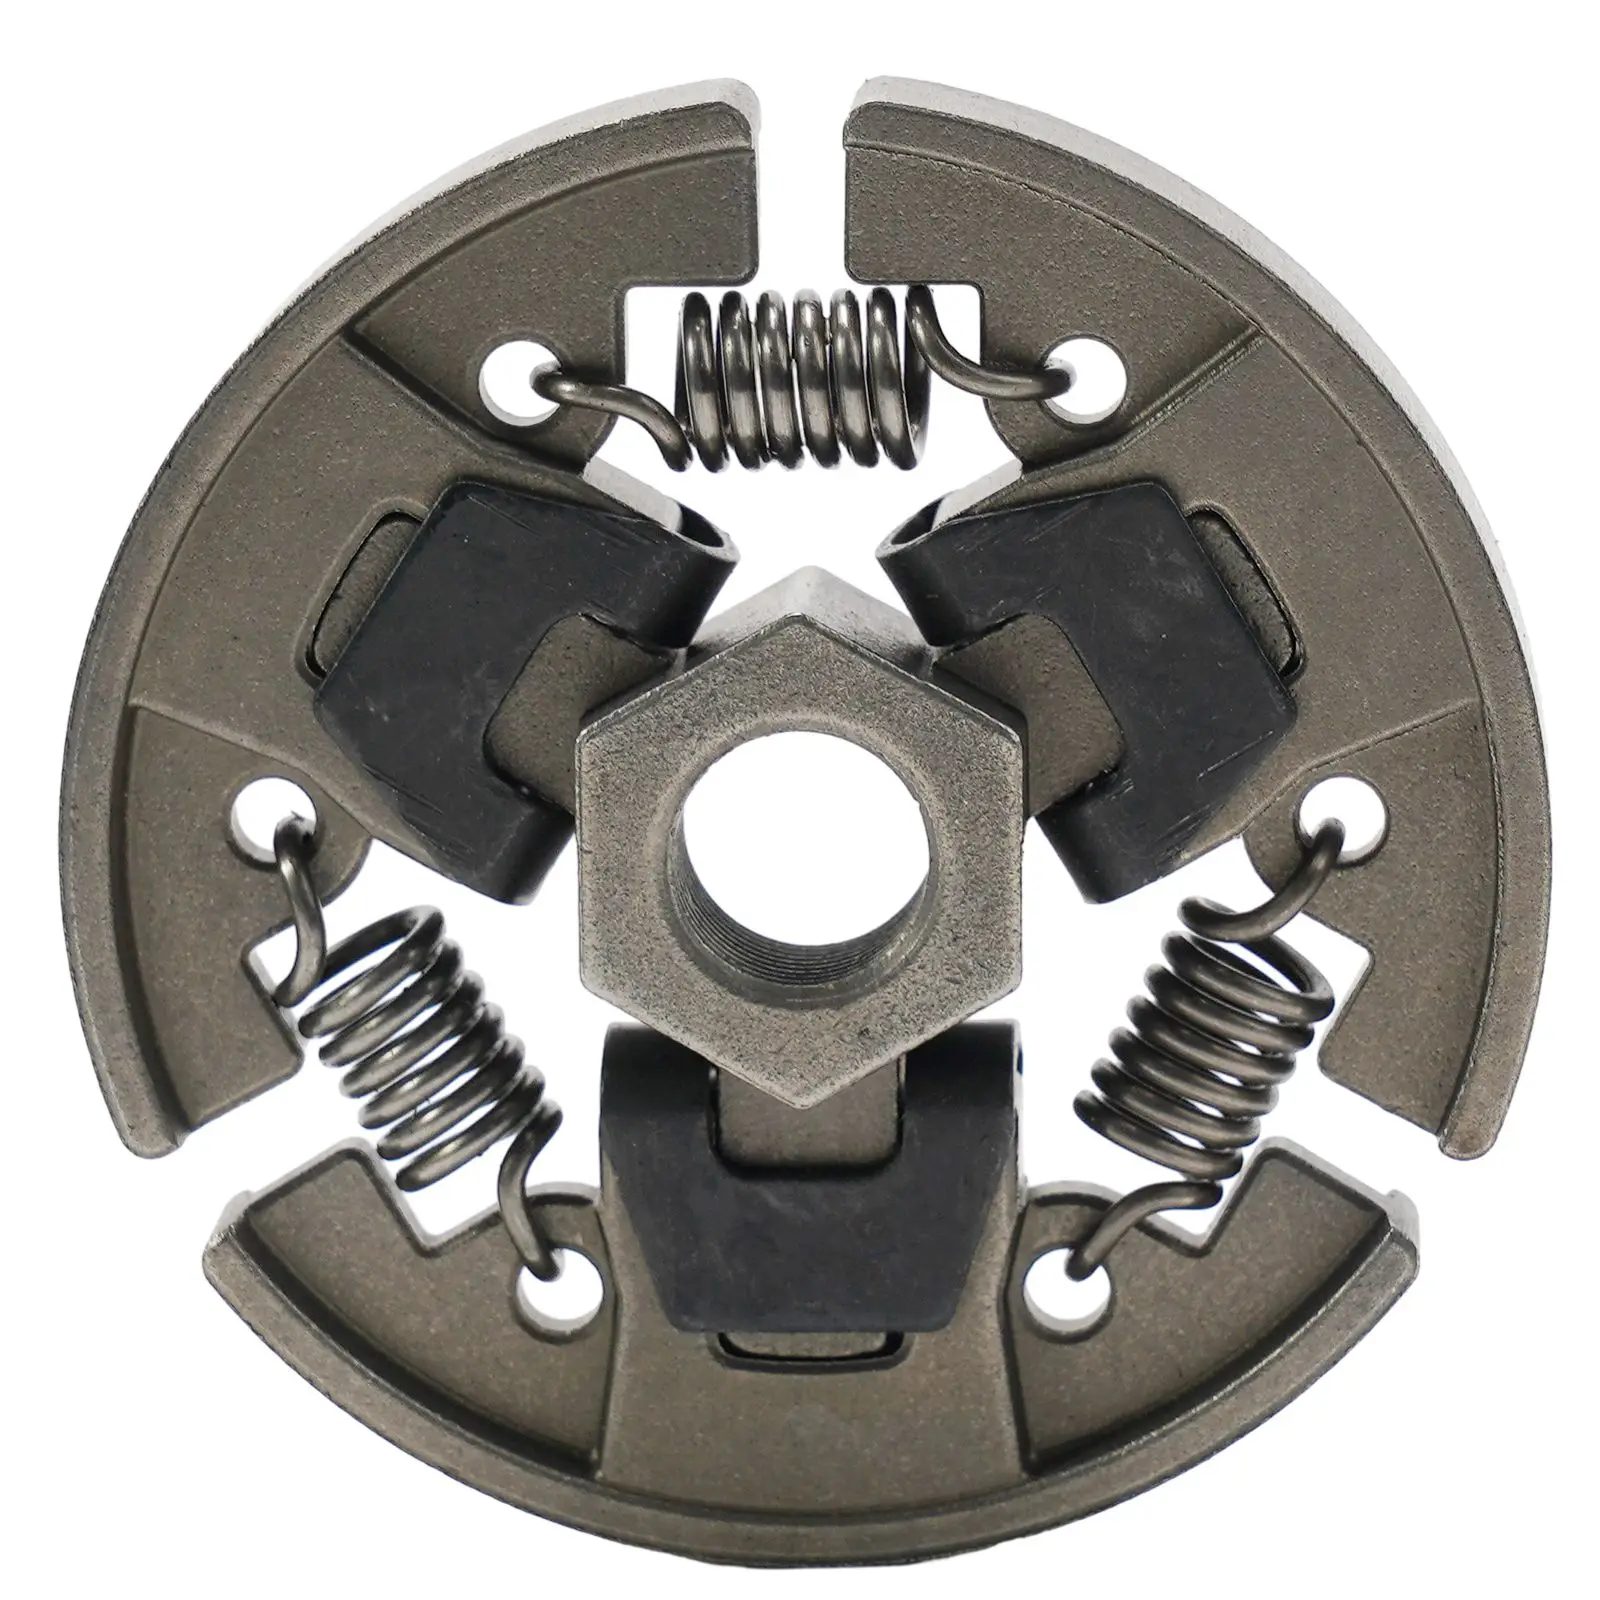 Clutch Spur Sprocket Drum Kit For Stihl 017 018 021 023 025 MS170 MS180 M S210 230 250 Chainsaw Replace 11236402003 95129332260